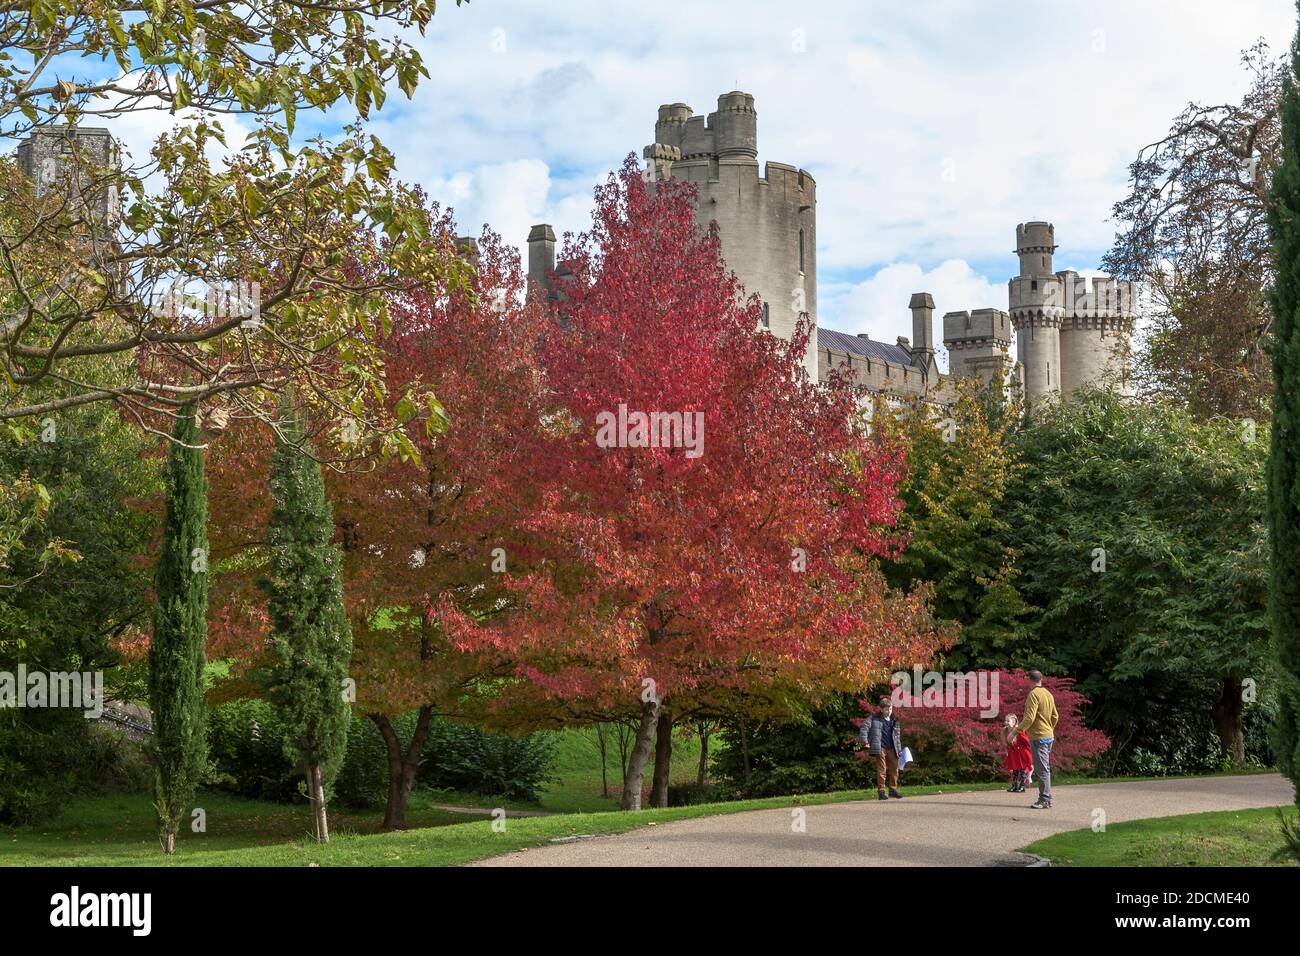 Arundel Castle from the Castle gardens, Arundel, West Sussex, England: Autumn colour on American sweetgum (Liquidambar styraciflua) in the foreground Stock Photo